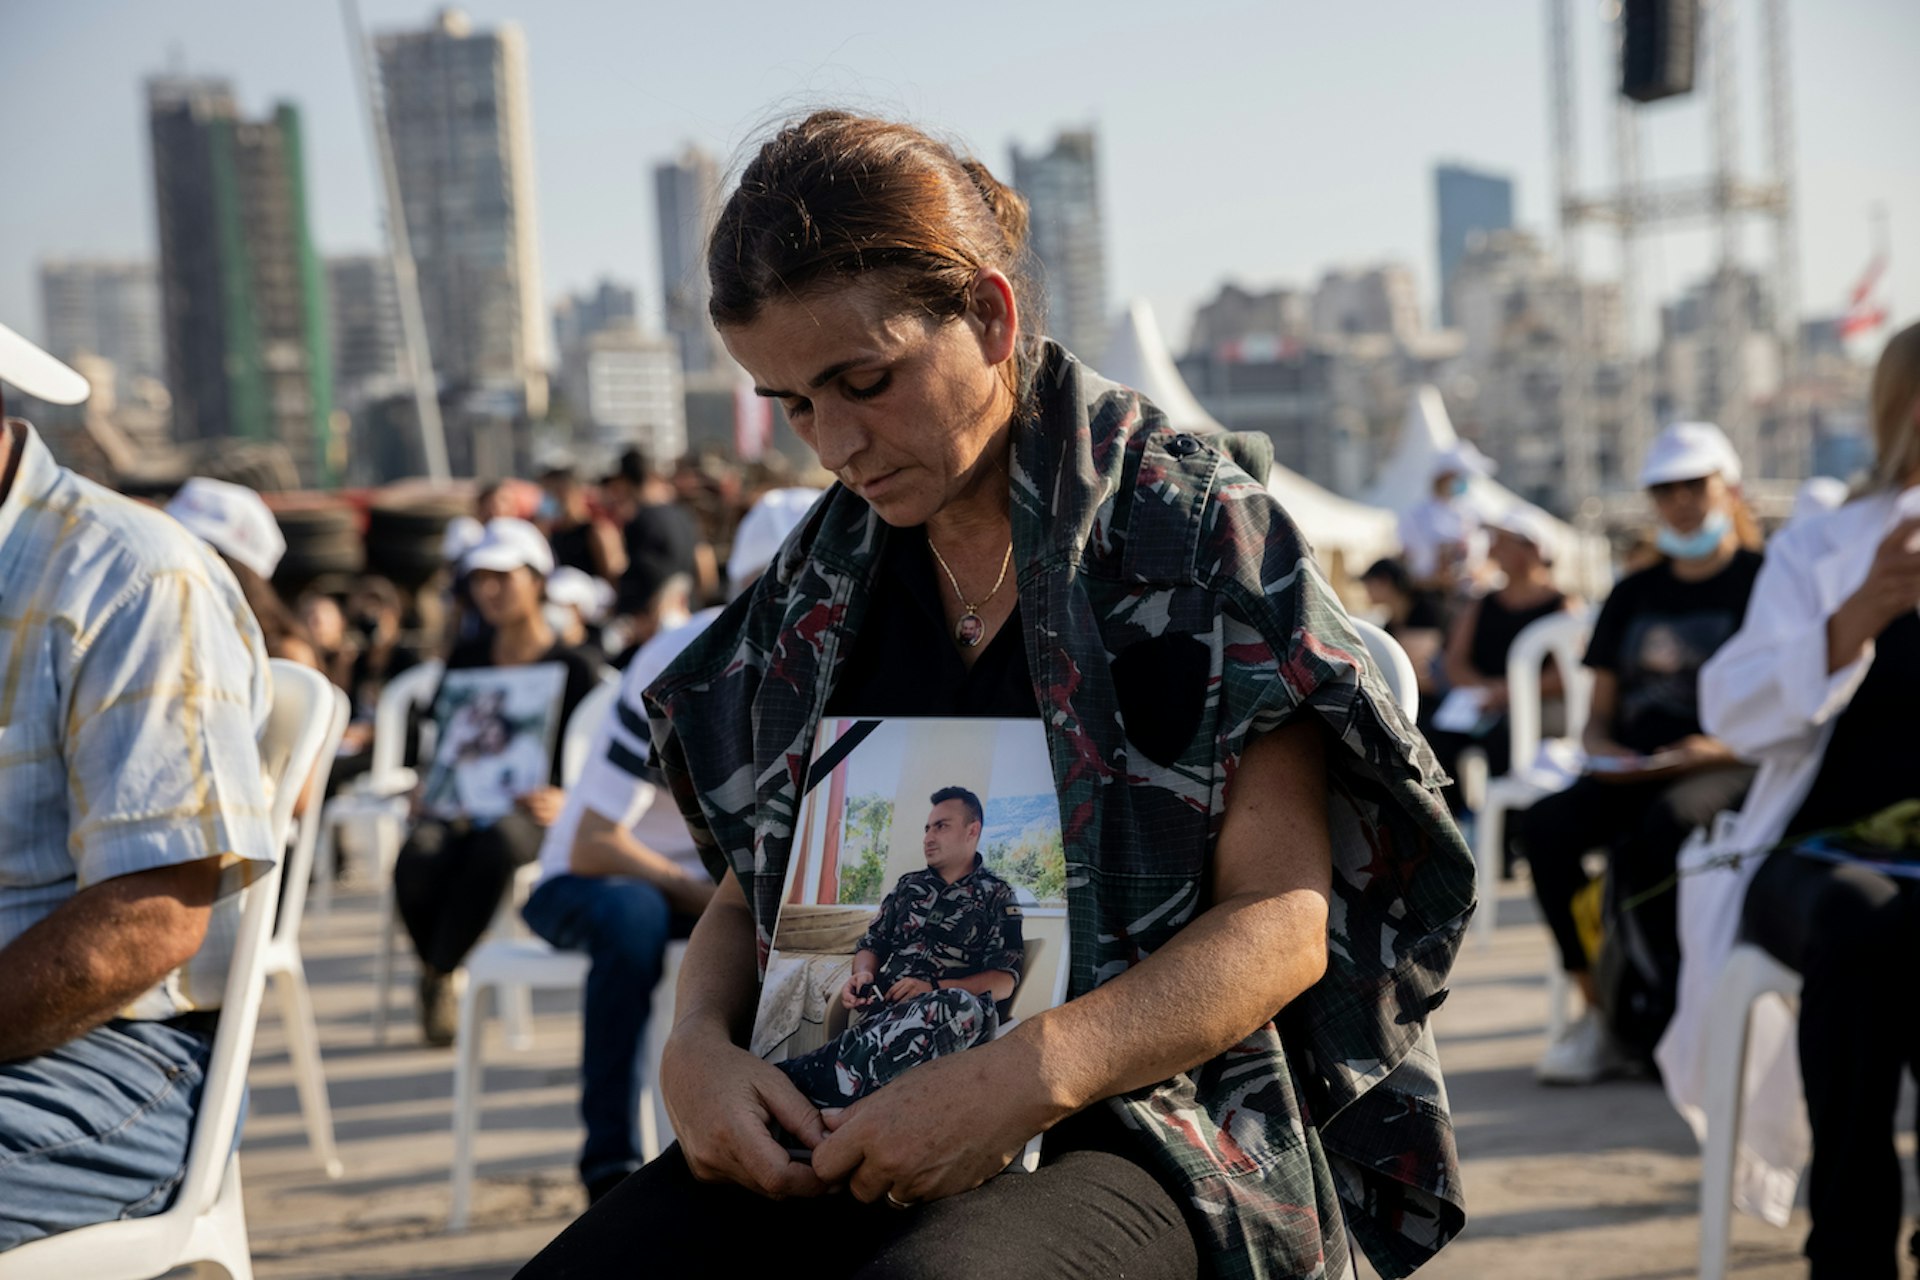 A year after the Beirut blast, the fight for justice continues